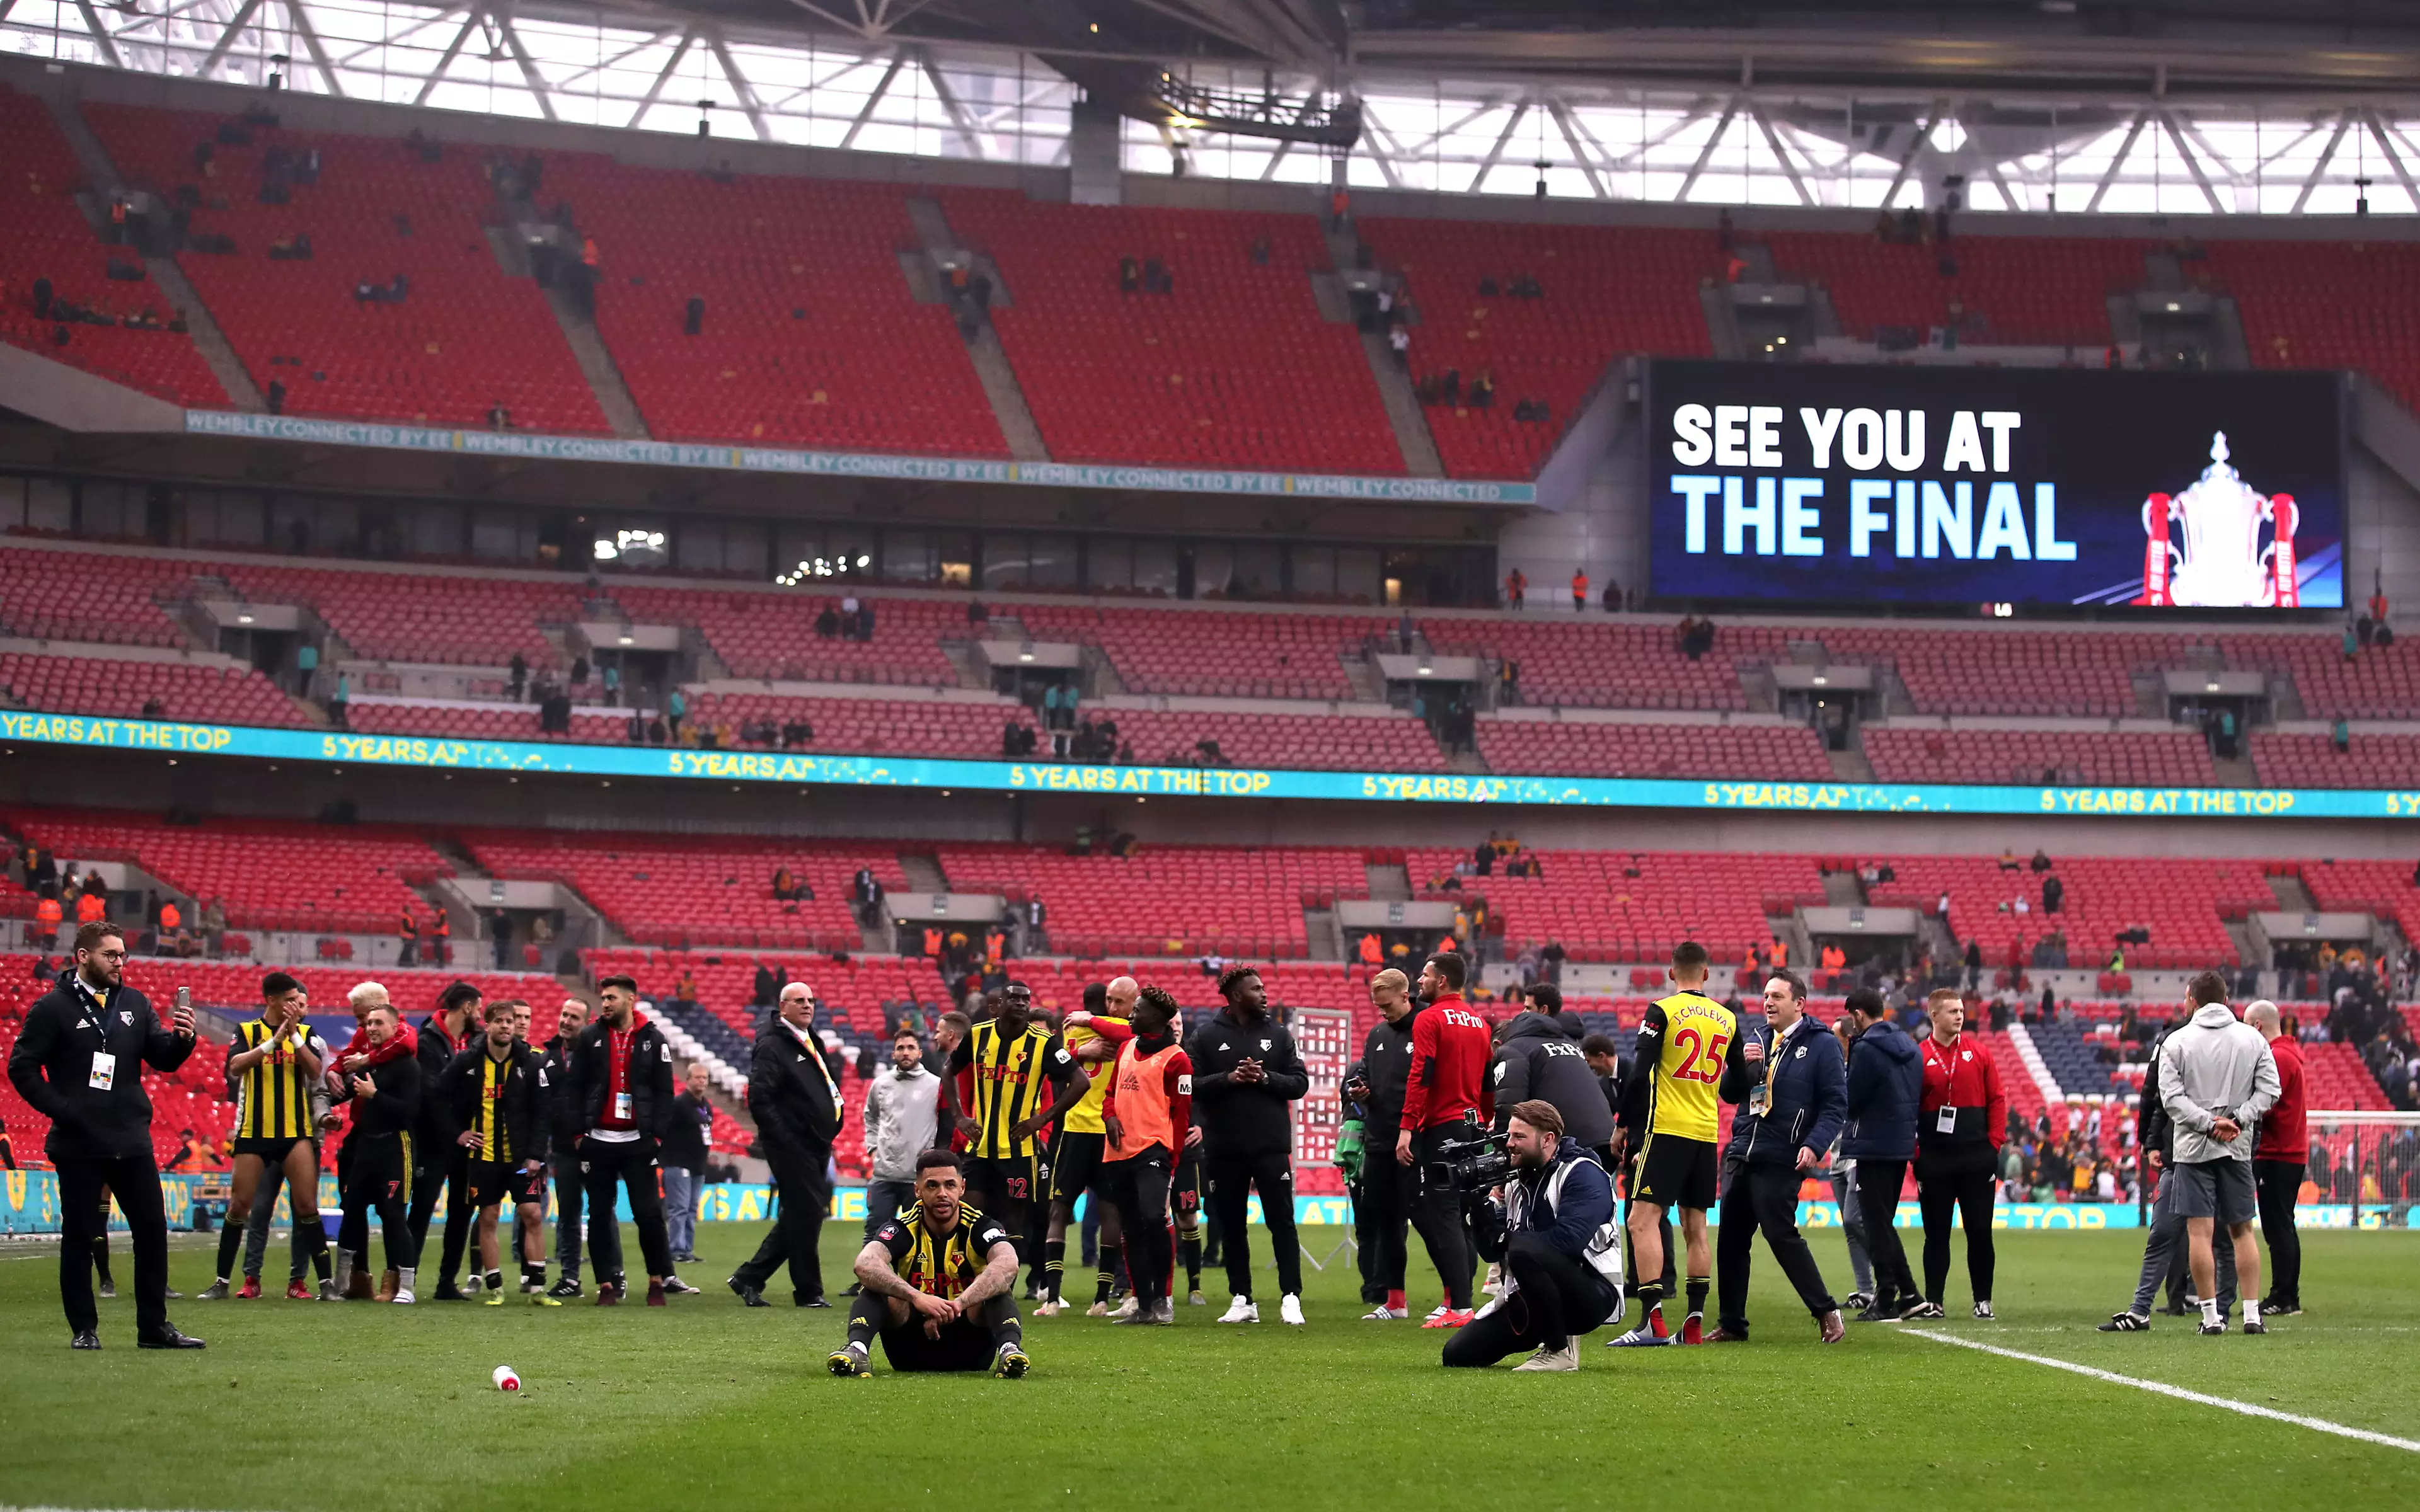 Watford beat Wolves to make it to the final. Image: PA Images